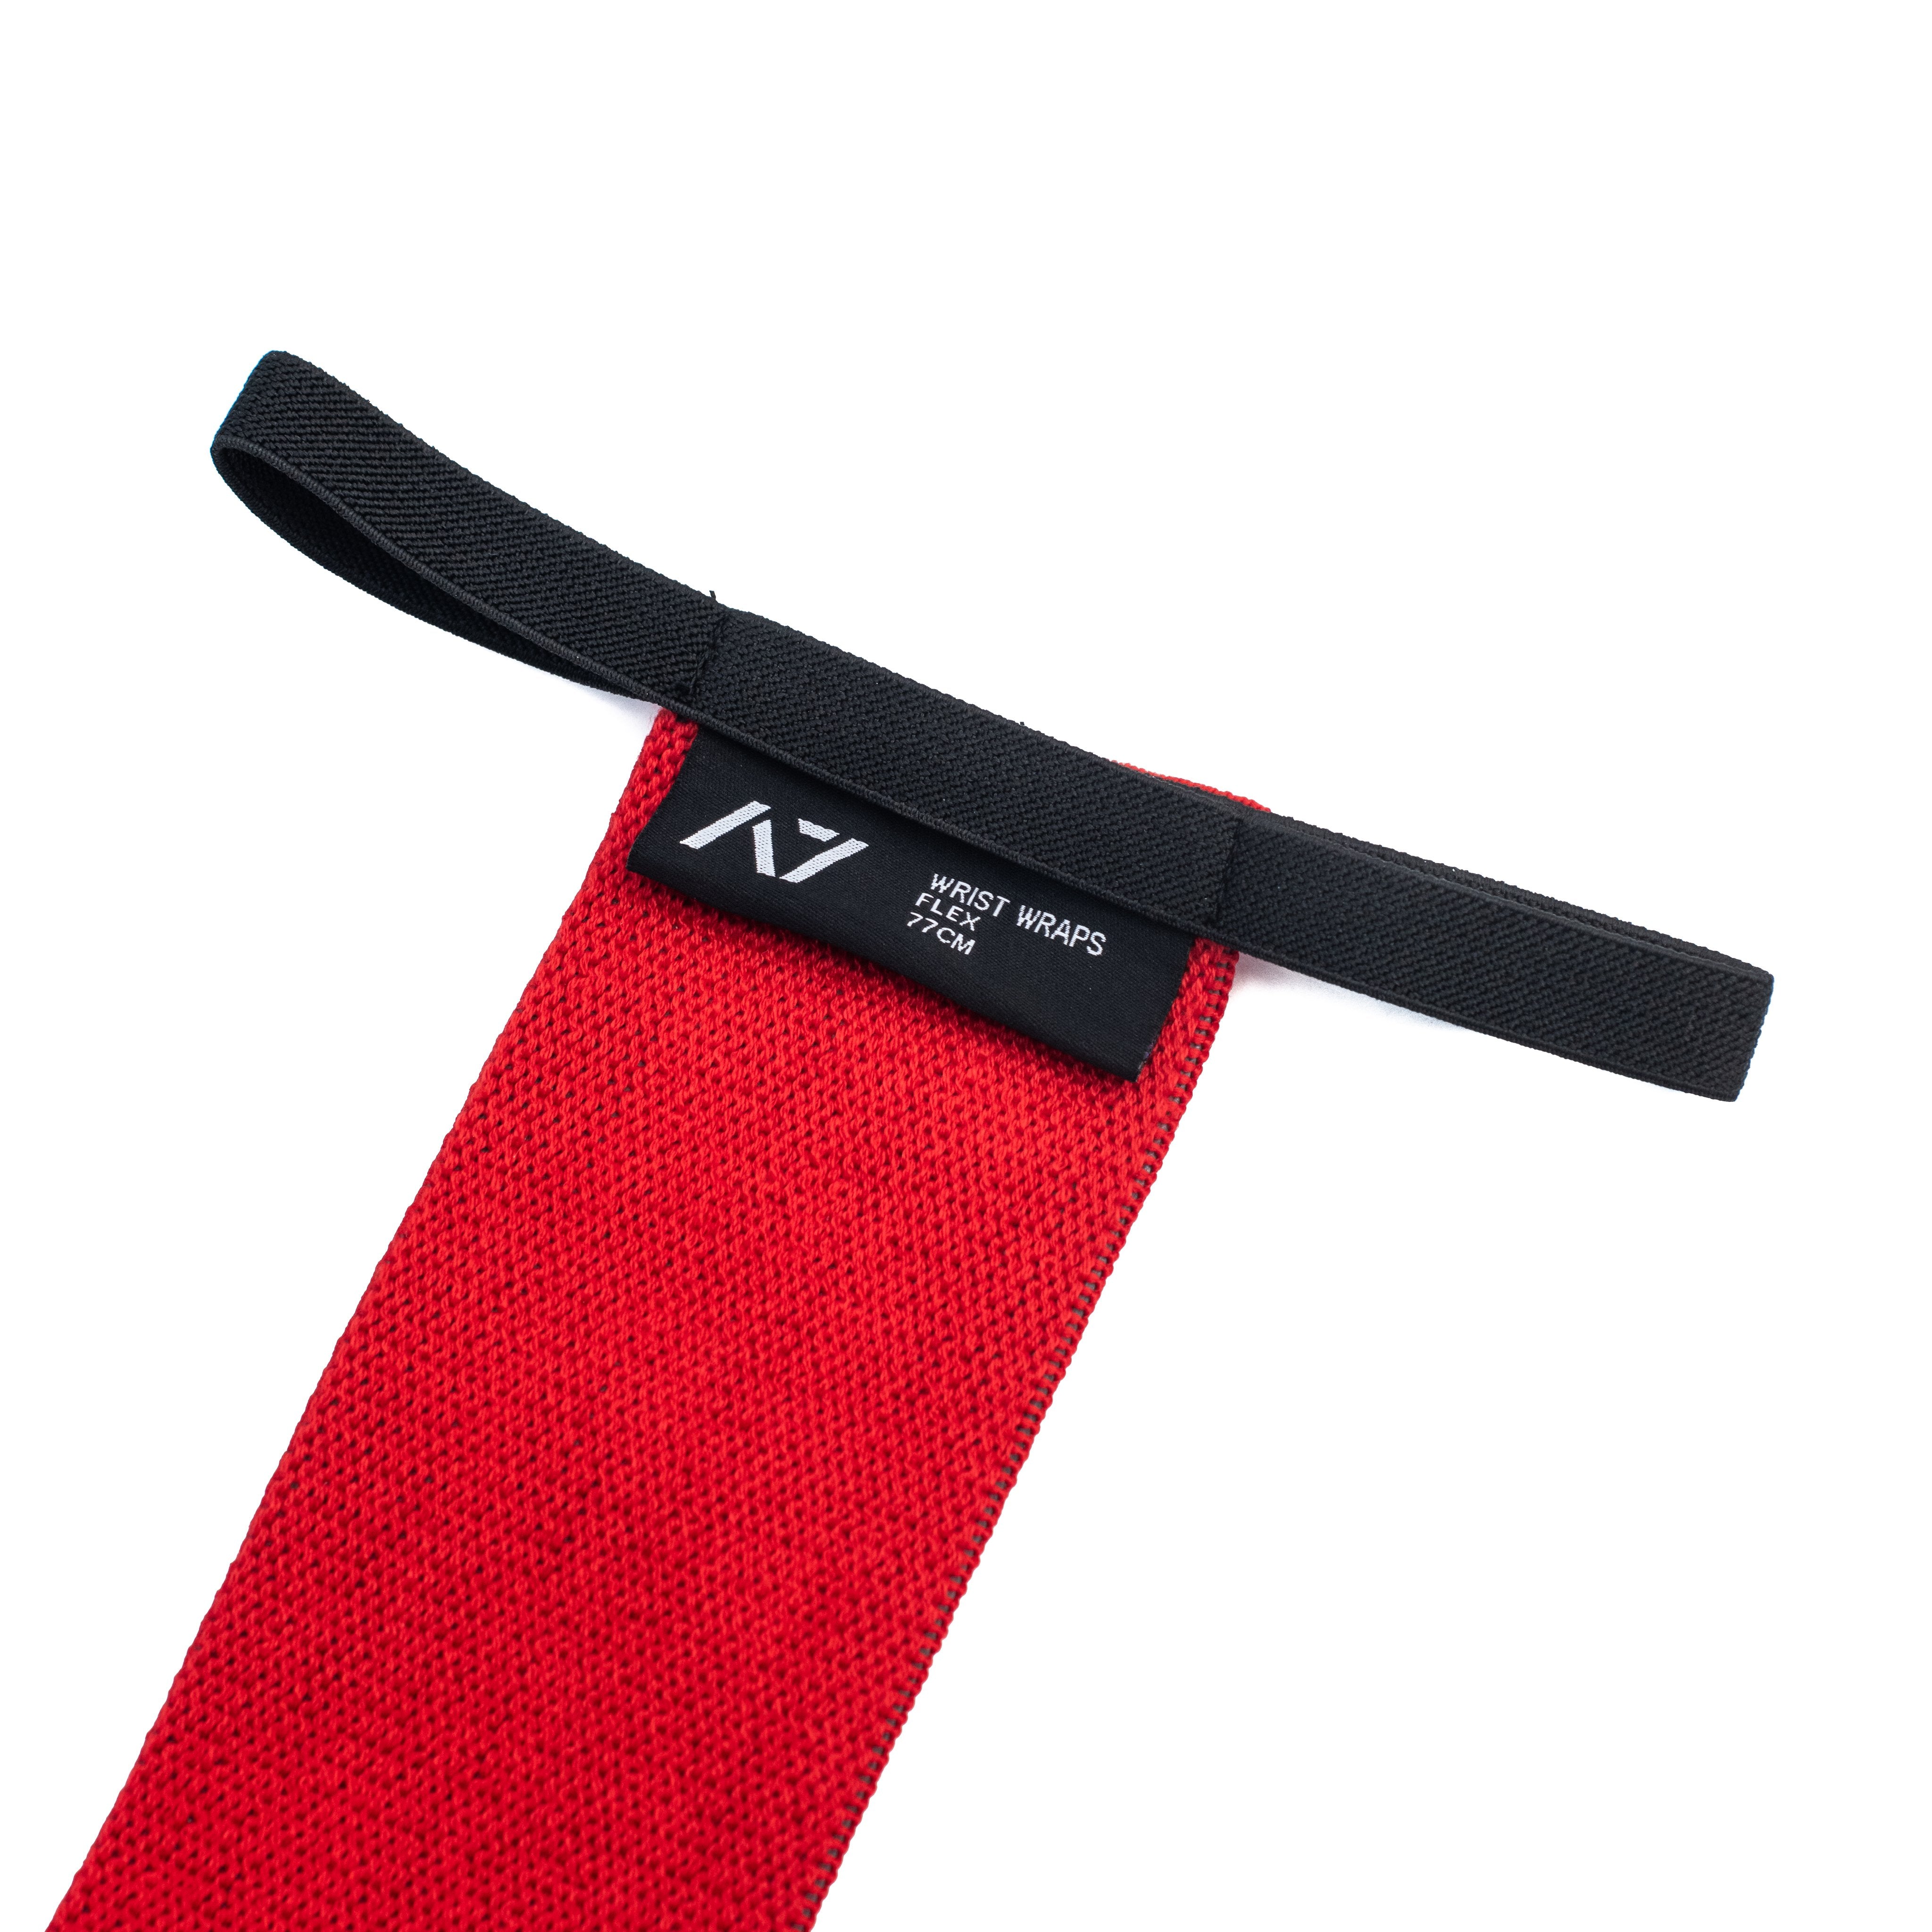 A7 Wrist Wraps are IPF approved. Inferno is the newest color combination to our Wrist Wraps. The classic black and red colorway you all loved in our FIRE USA meet tee can now partner with these wraps for a standout look like no other. Excited to see you set some new PBs in these wraps and show off your Inferno spirt from within. A7 wrist wraps are a perfect addition to your IPF approved kit.